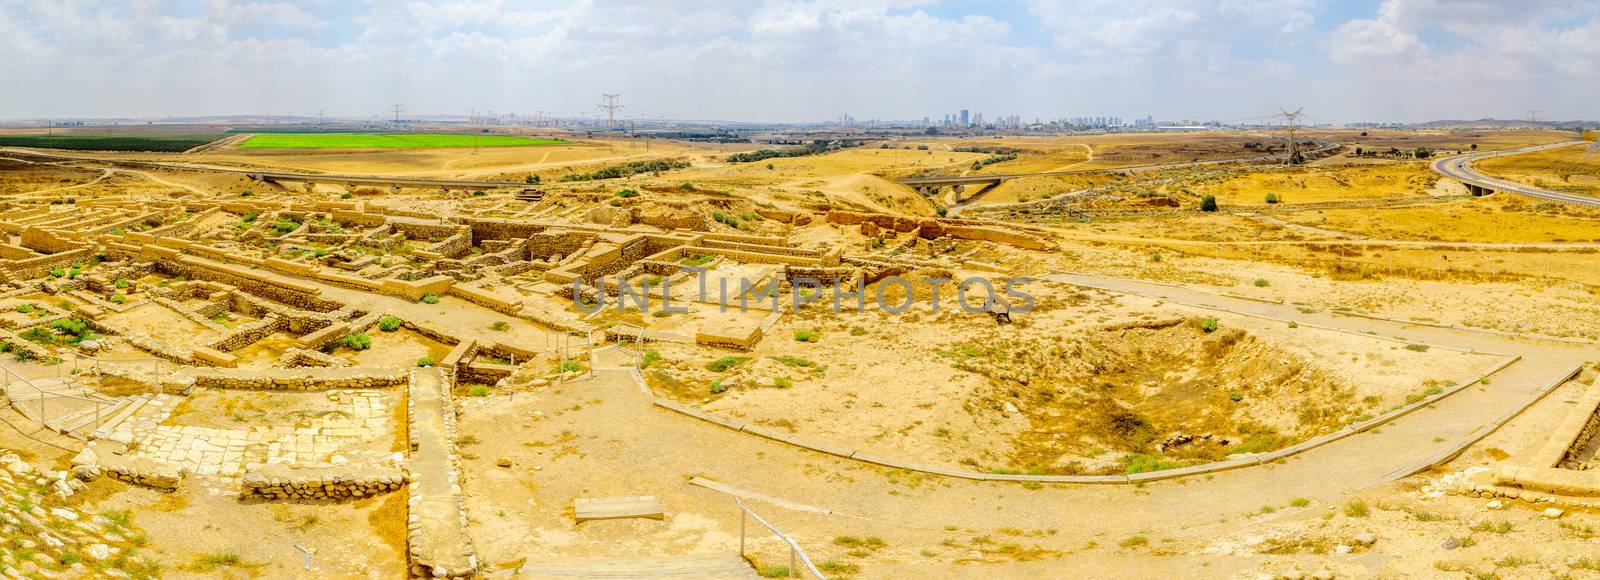 Panoramic view of Tel Beer Sheva archaeological site by RnDmS